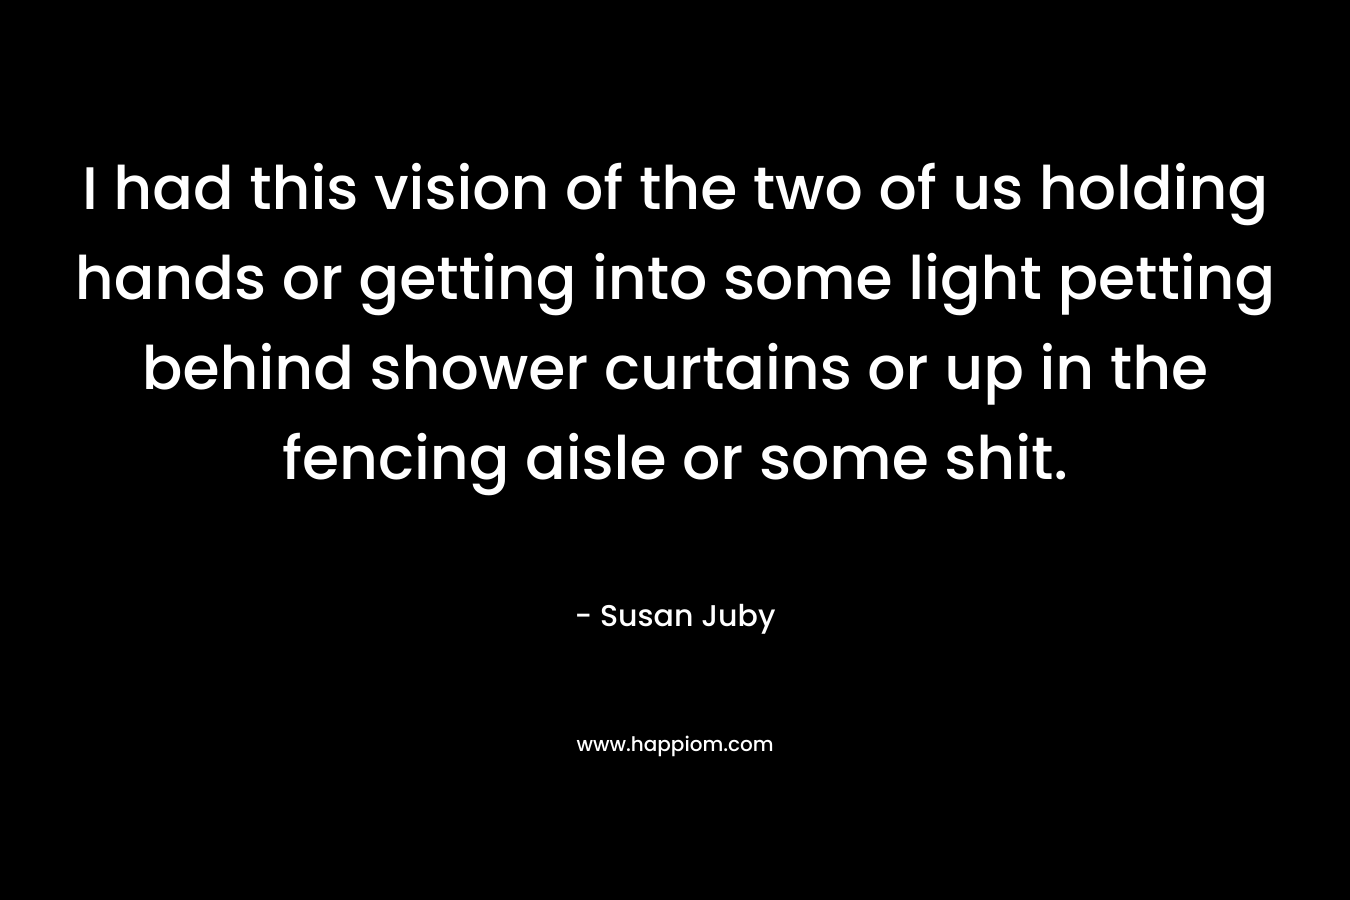 I had this vision of the two of us holding hands or getting into some light petting behind shower curtains or up in the fencing aisle or some shit. – Susan Juby